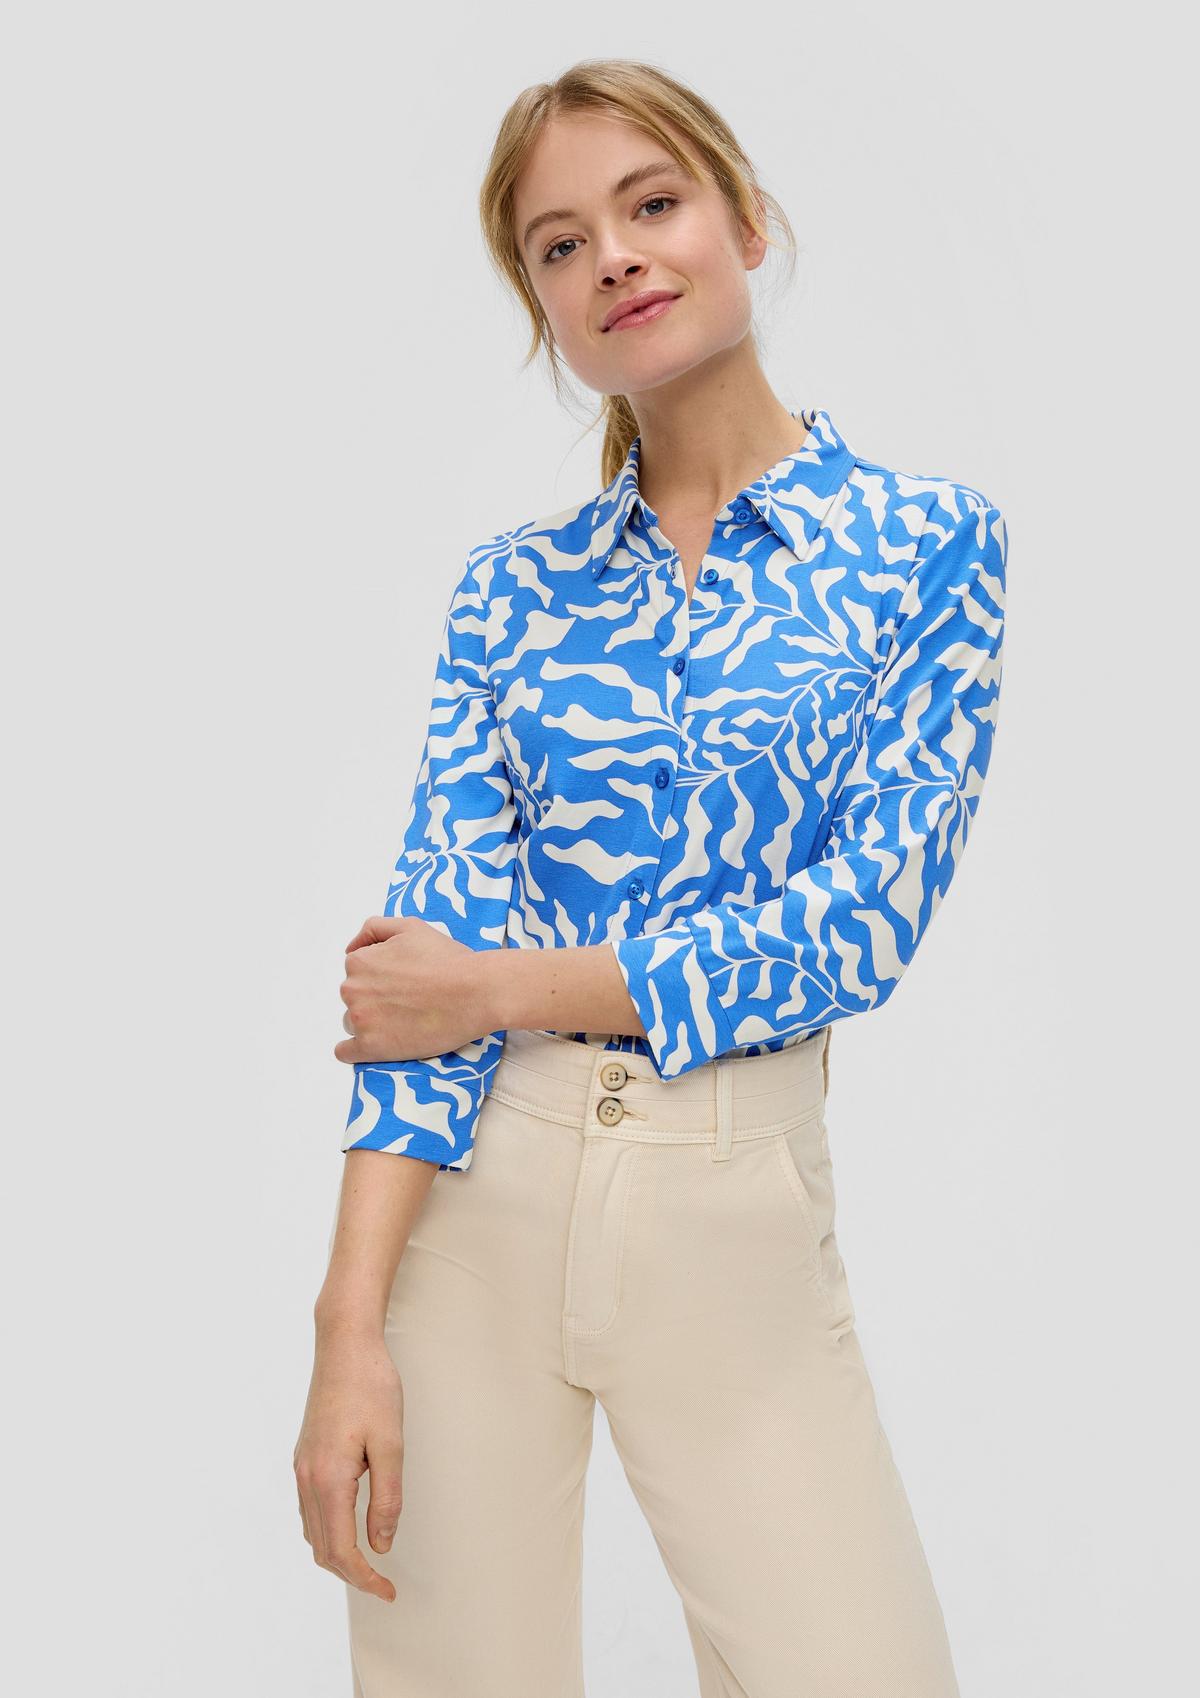 3/4-Sleeve Blouse with V Neckline and Notch Collar